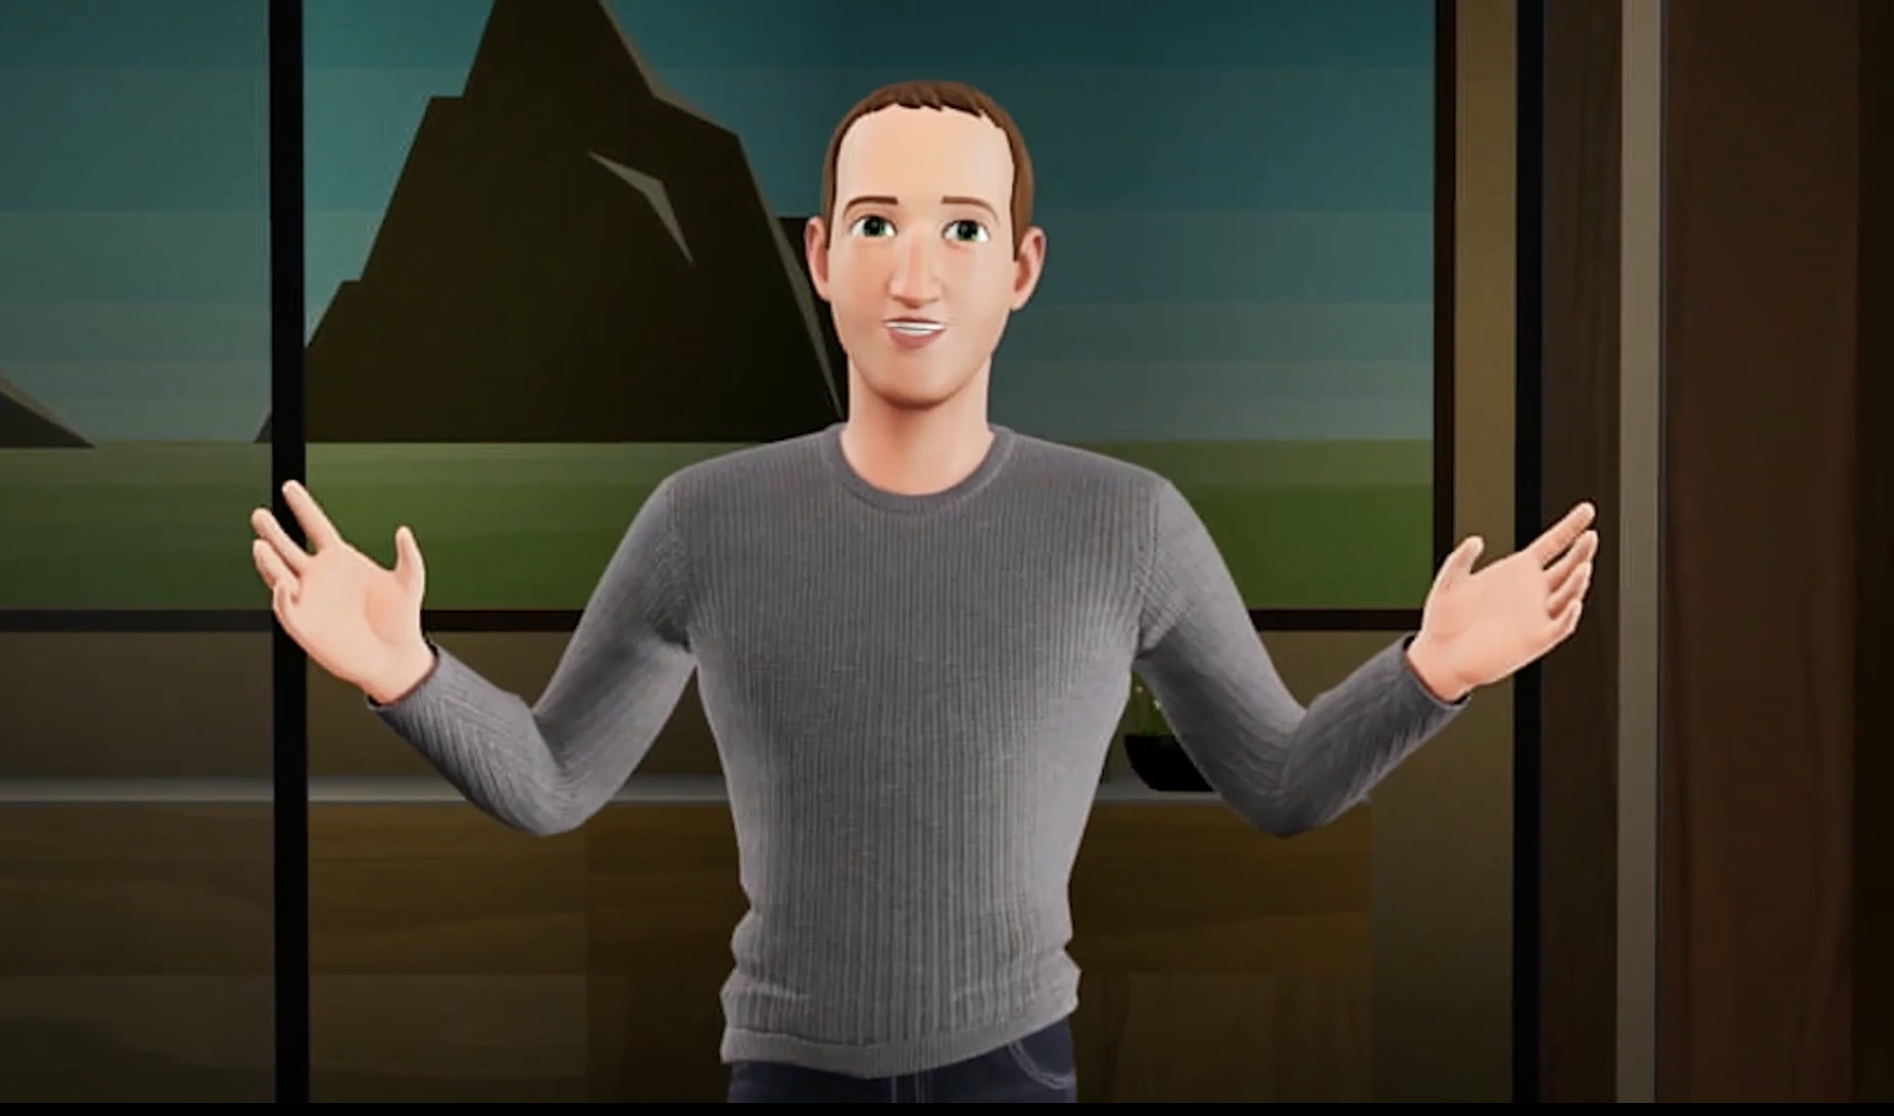 What Is The Metaverse—And Why Does Mark Zuckerberg Care So Much About It?